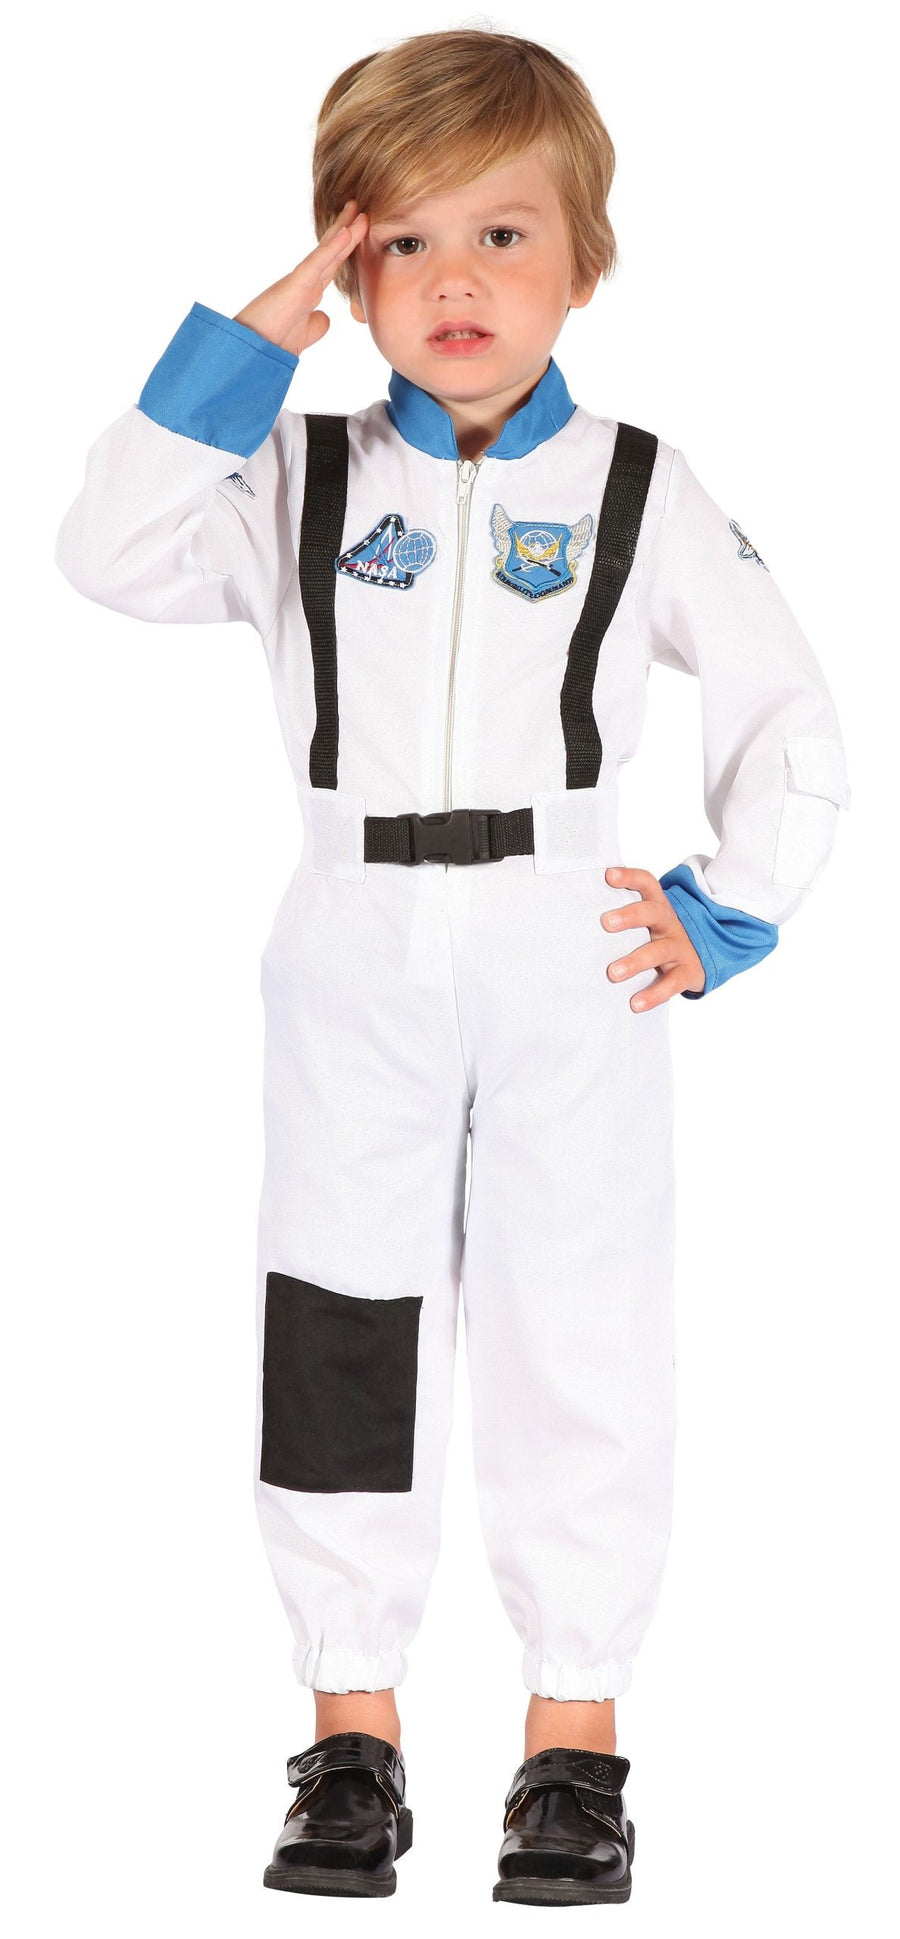 Boys Astronaut Toddler Childrens Costume Male To Fit Child Of Height 90cm 100cm Halloween_1